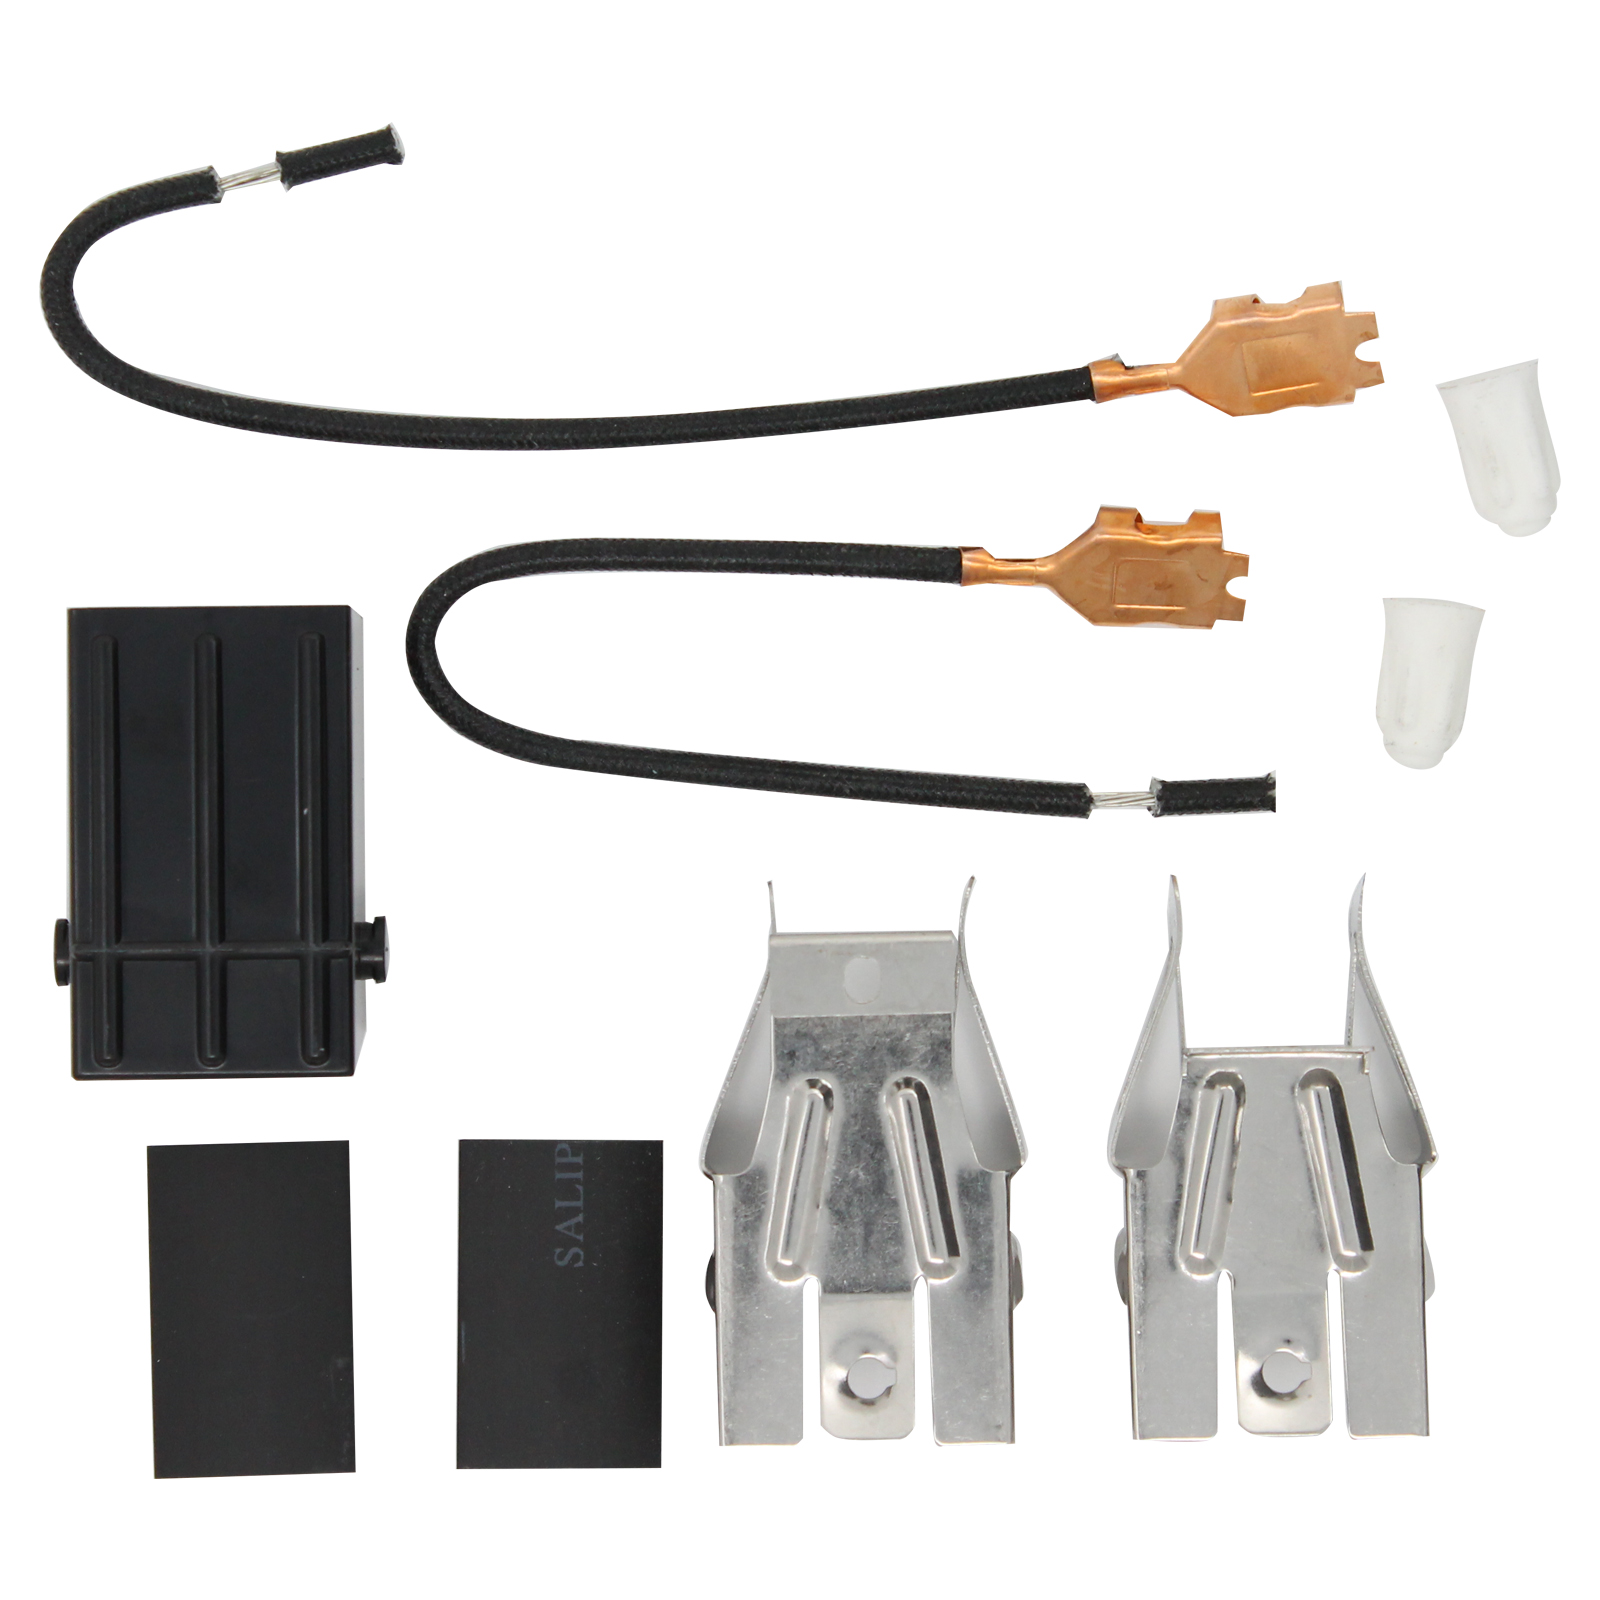 330031 Top Burner Receptacle Kit Replacement for Whirlpool RE963PXPT0 Range/Cooktop/Oven - Compatible with 330031 Range Burner Receptacle Kit - UpStart Components Brand - image 2 of 4